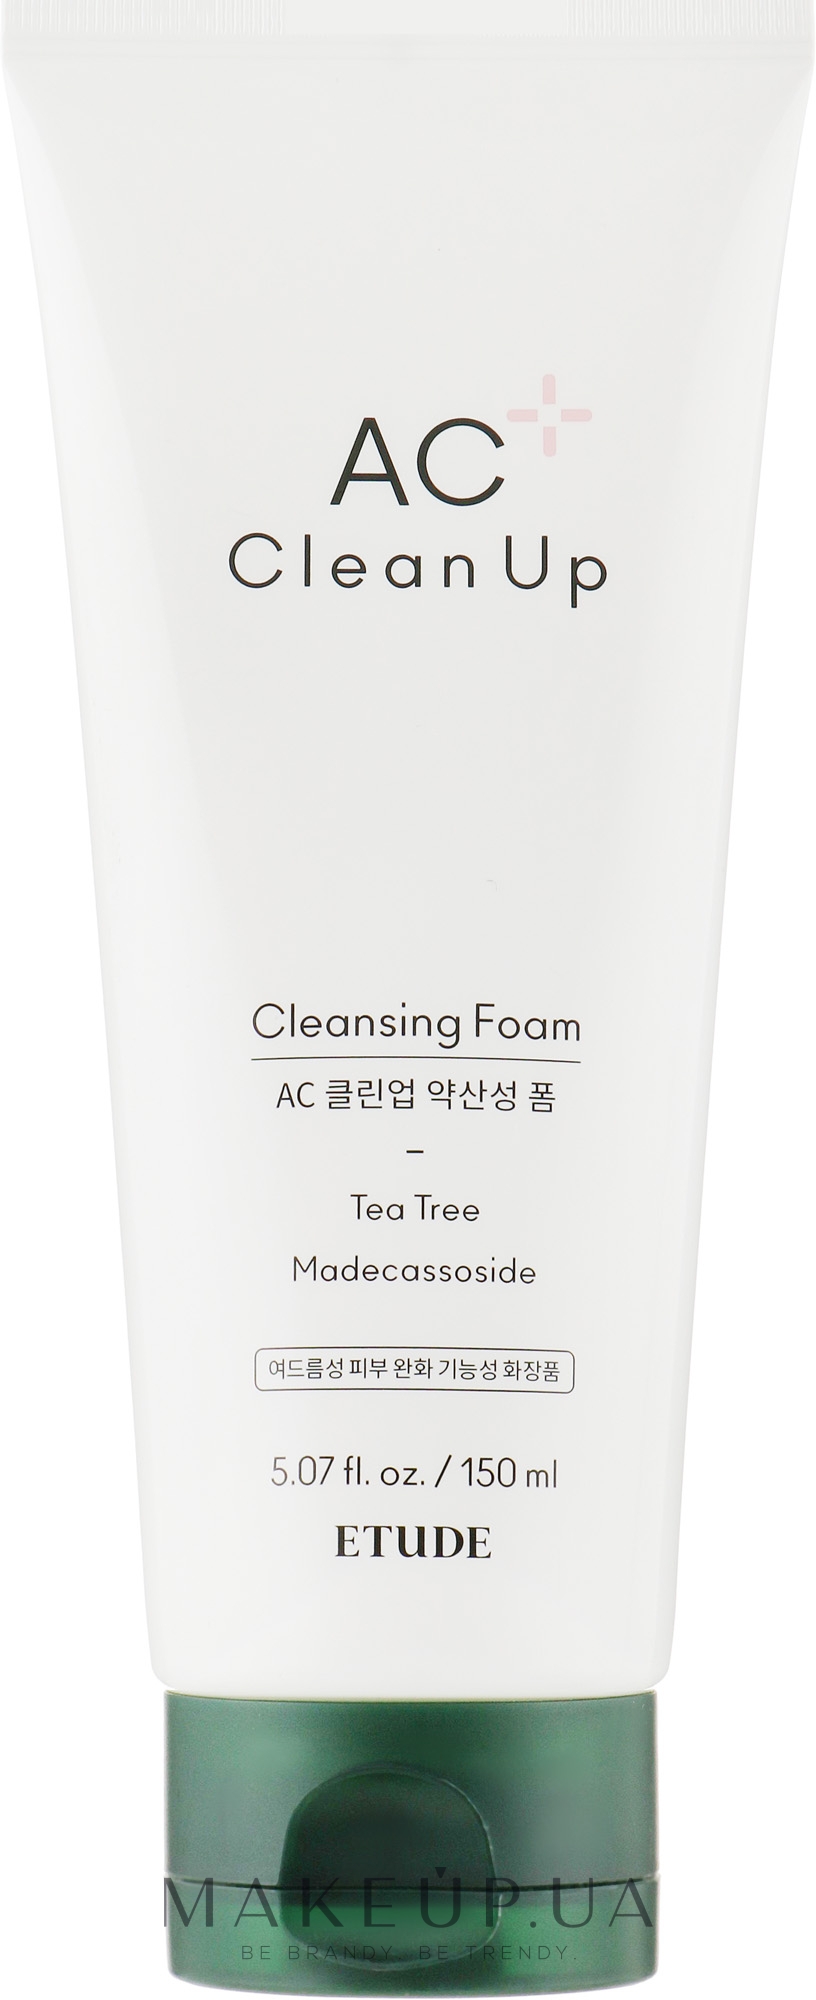 Cleansing up. Etude House AC clean up Cleansing Foam,150ml. Etude AC clean up Cleansing Foam Tea Tree. Etude House пенка для умывания AC clean up Cleansing Foam 150мл. Etude House AC clean up Pink Powder Mask.